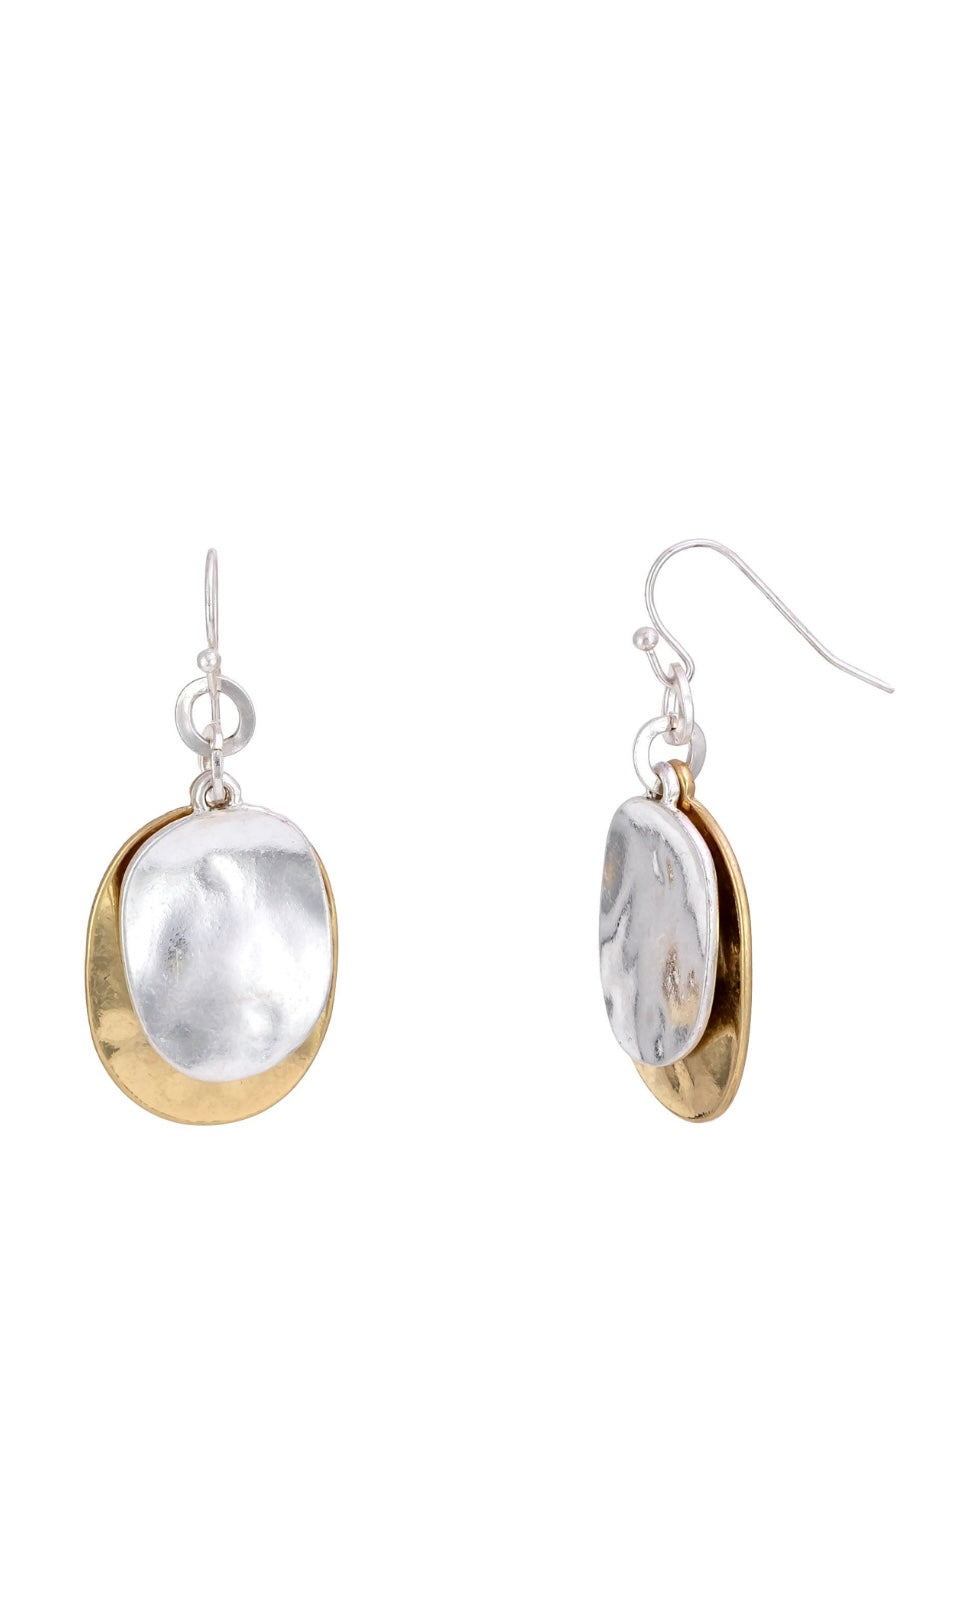 Earring Two Tone Hammered Gold & Silver Double Disc Drop Earrings